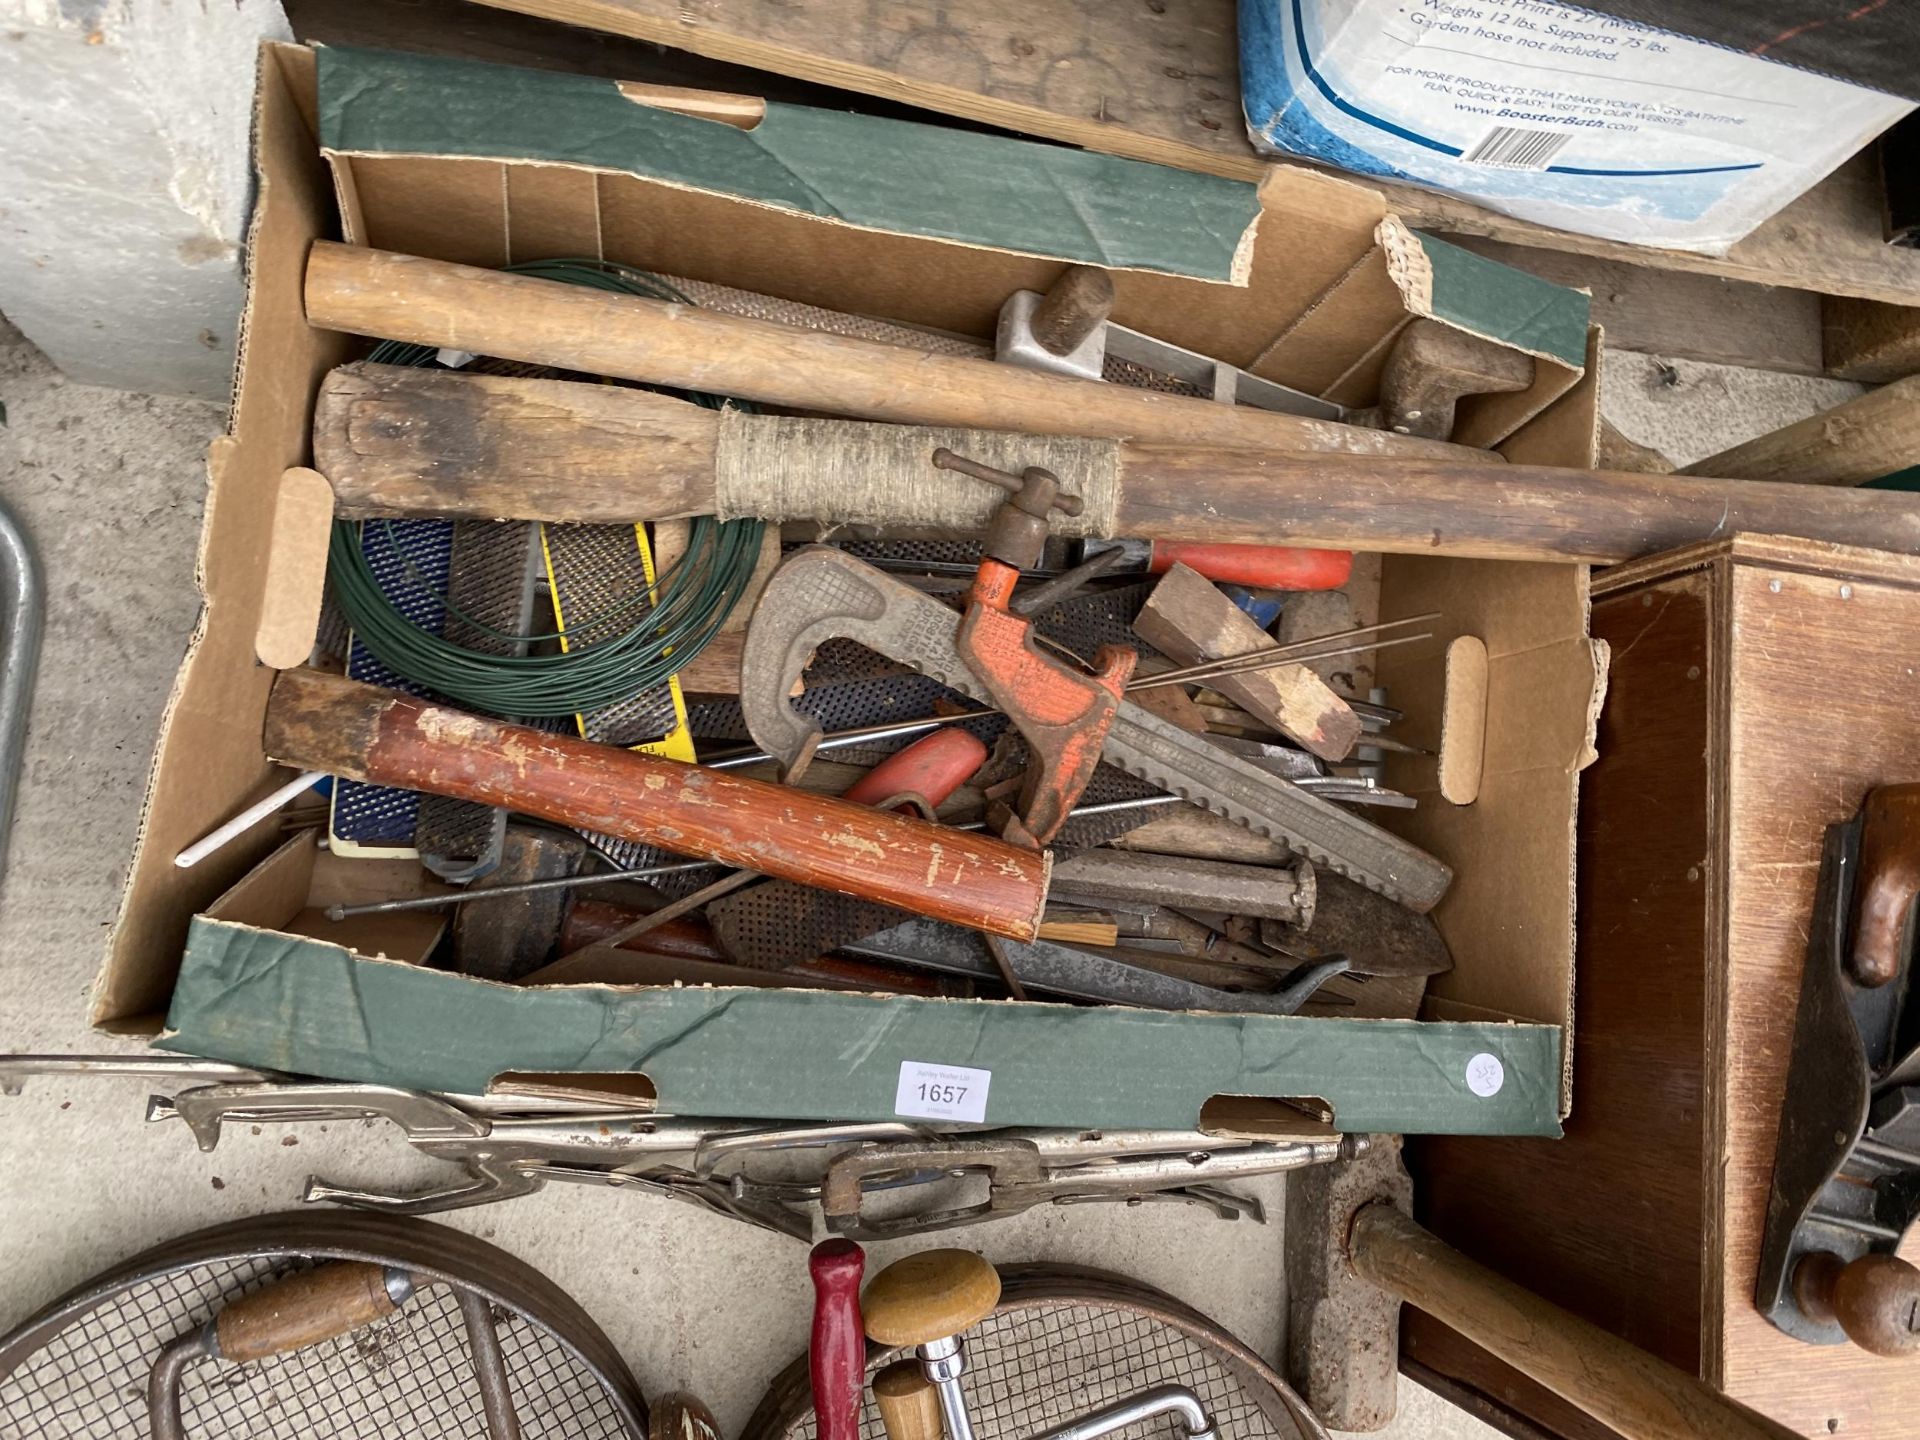 AN ASSORTMENT OF VINTAGE TOOLS TO INCLUDE WOOD PLANES, BRACE DRILLS AND AN AXE ETC - Image 2 of 6